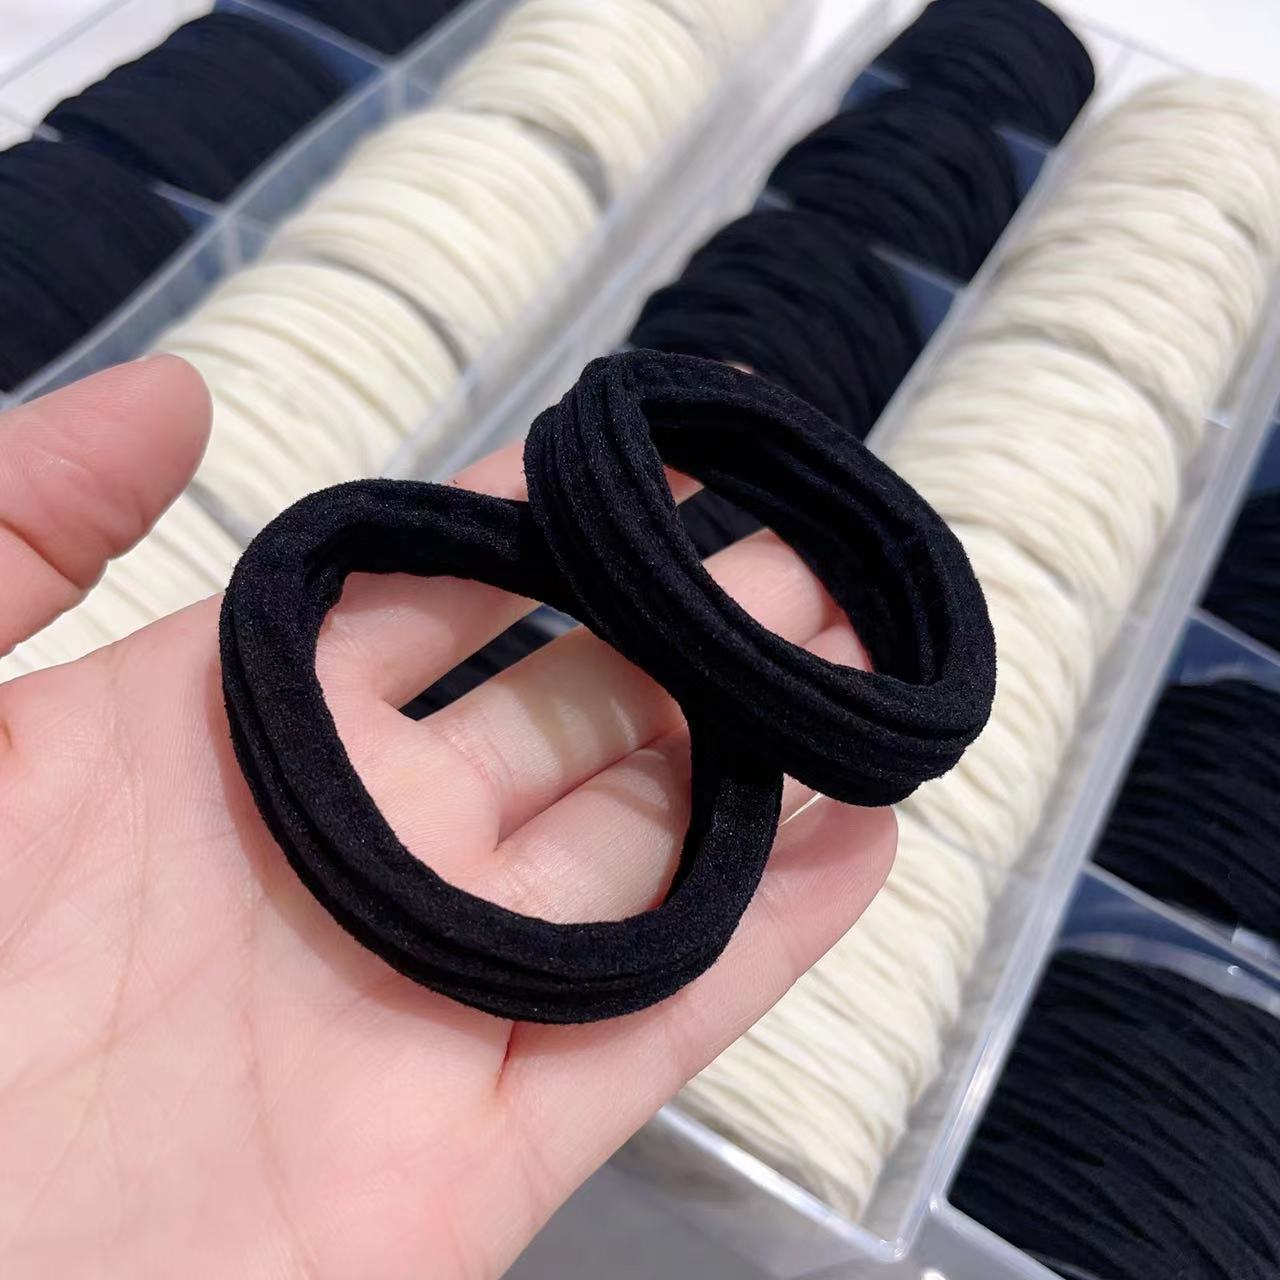 New Black Rice Combination Simple Elegant Fashion Elastic Towel Ring Hair Band All-Match Horsetail Does Not Hurt Hair Rope Rubber Band